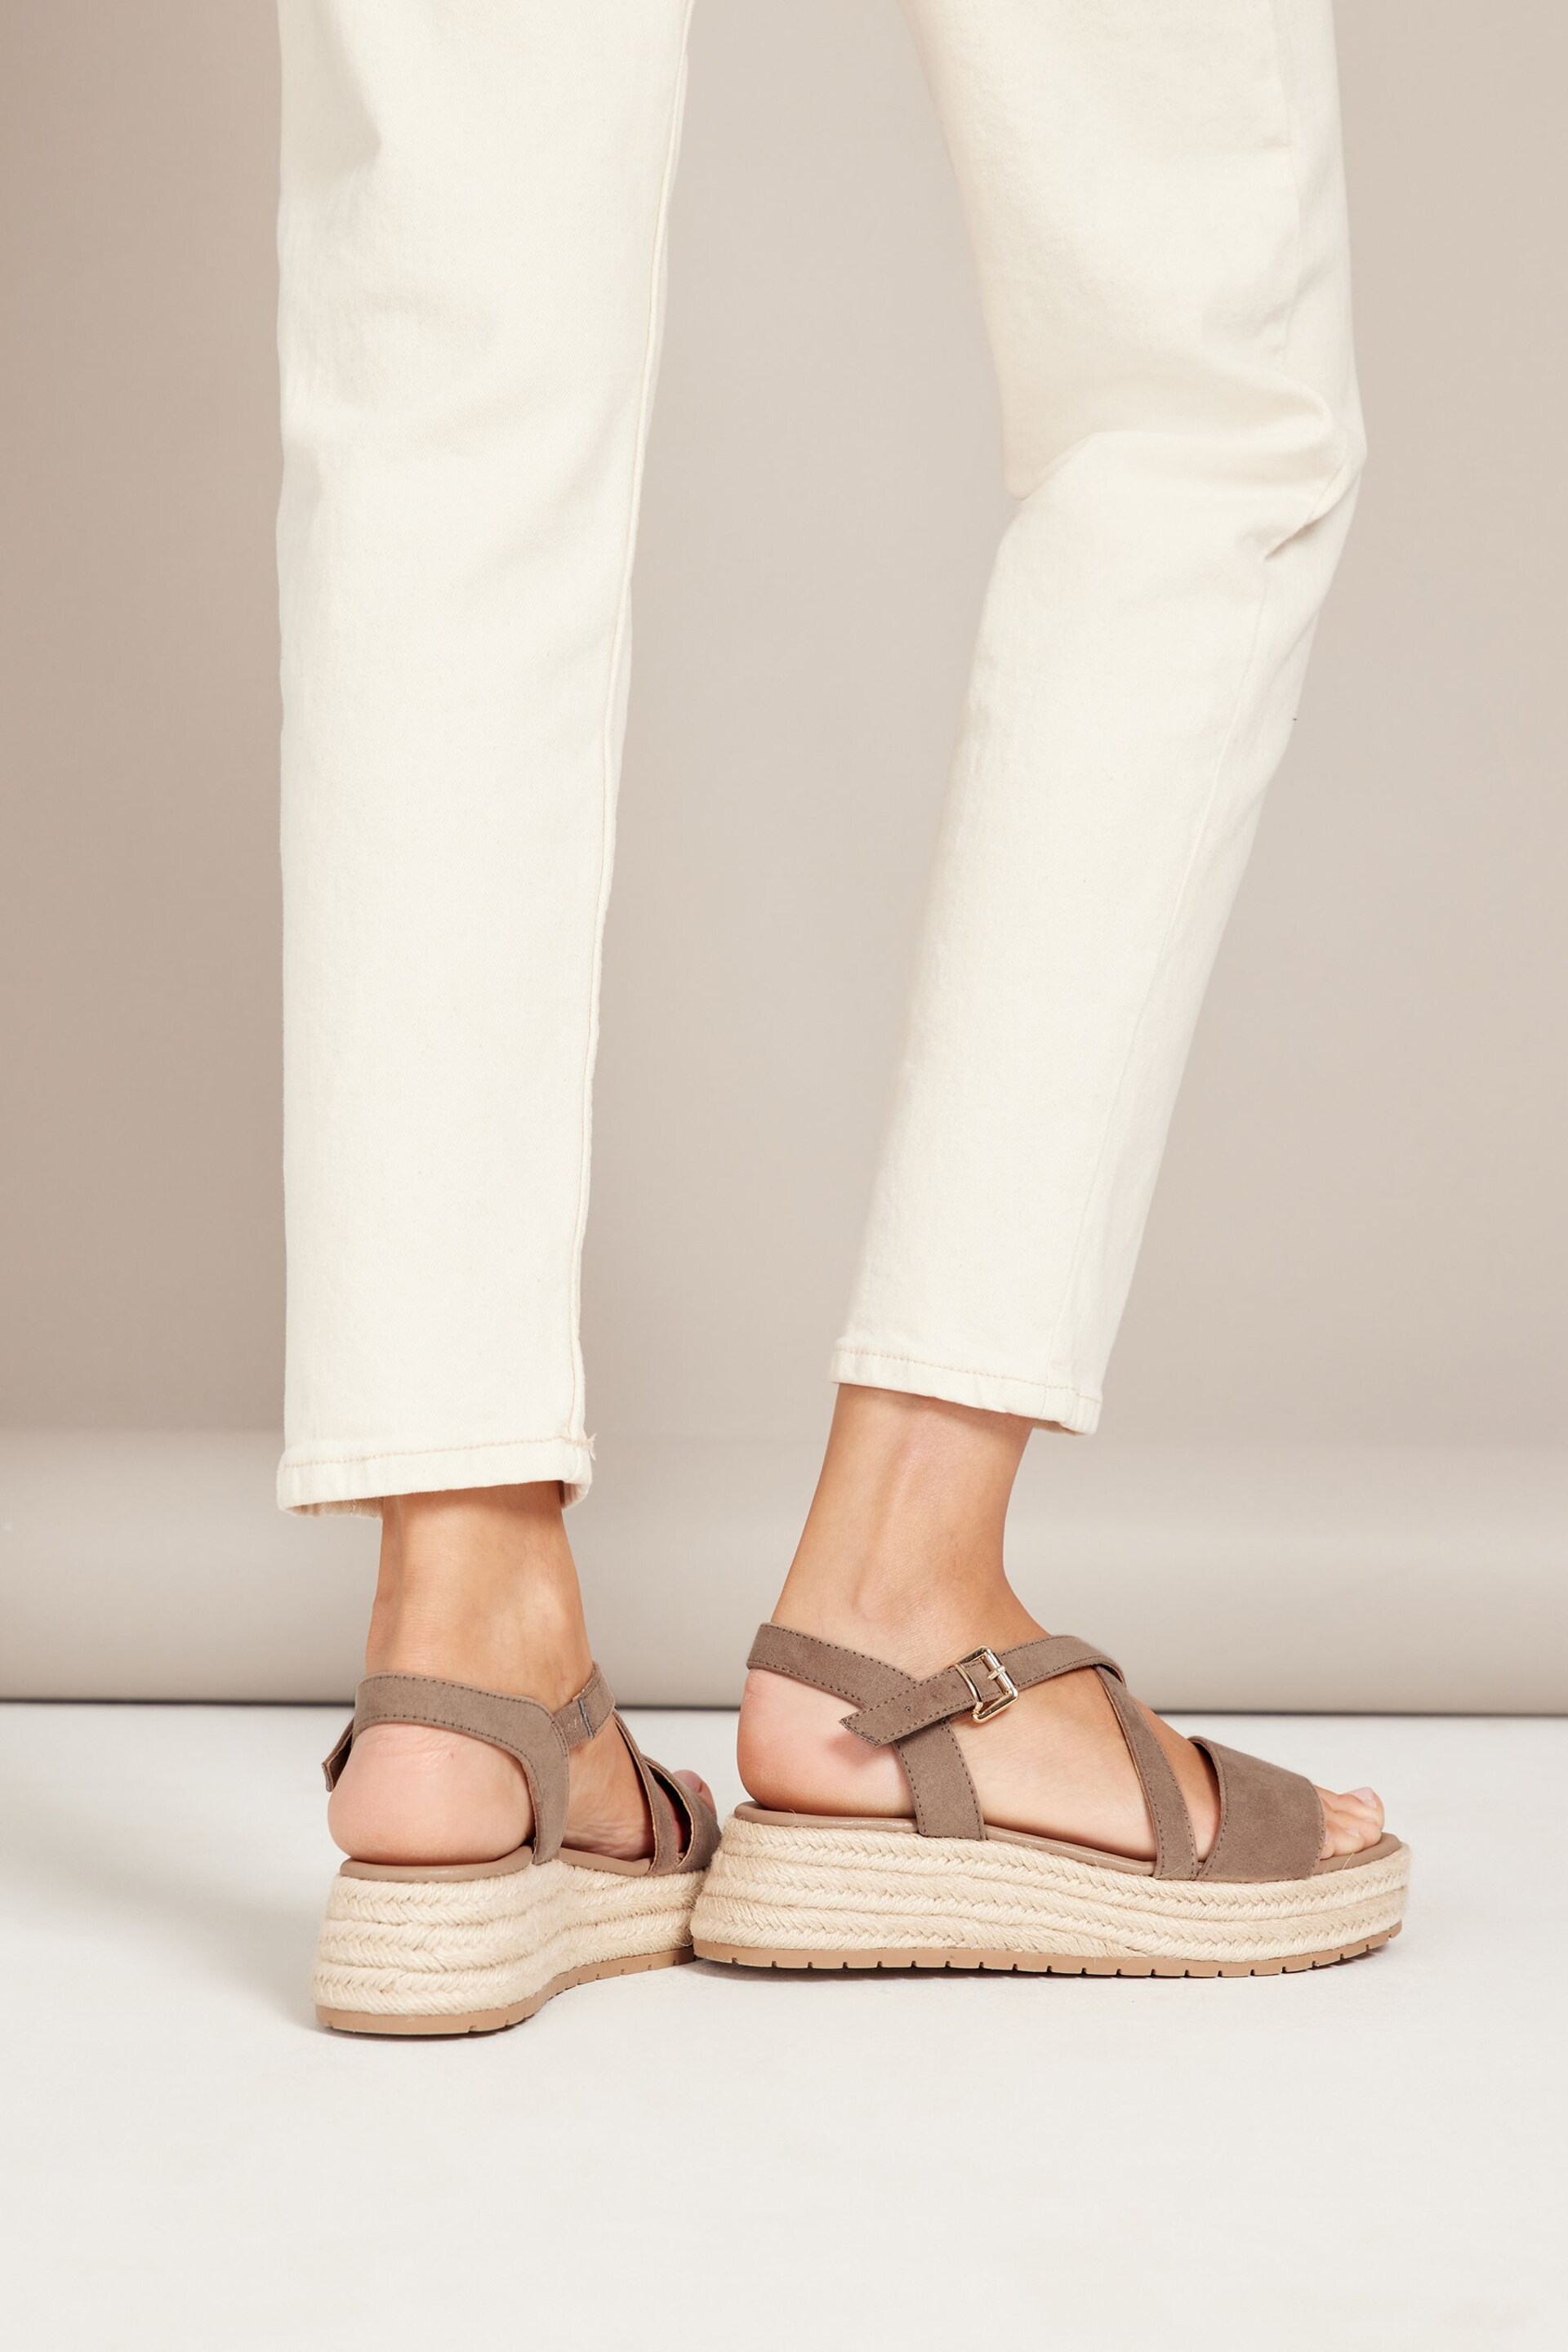 Friends Like These Beige Regular Fit Strappy Faux Leather Flatform Sandal - Image 2 of 4